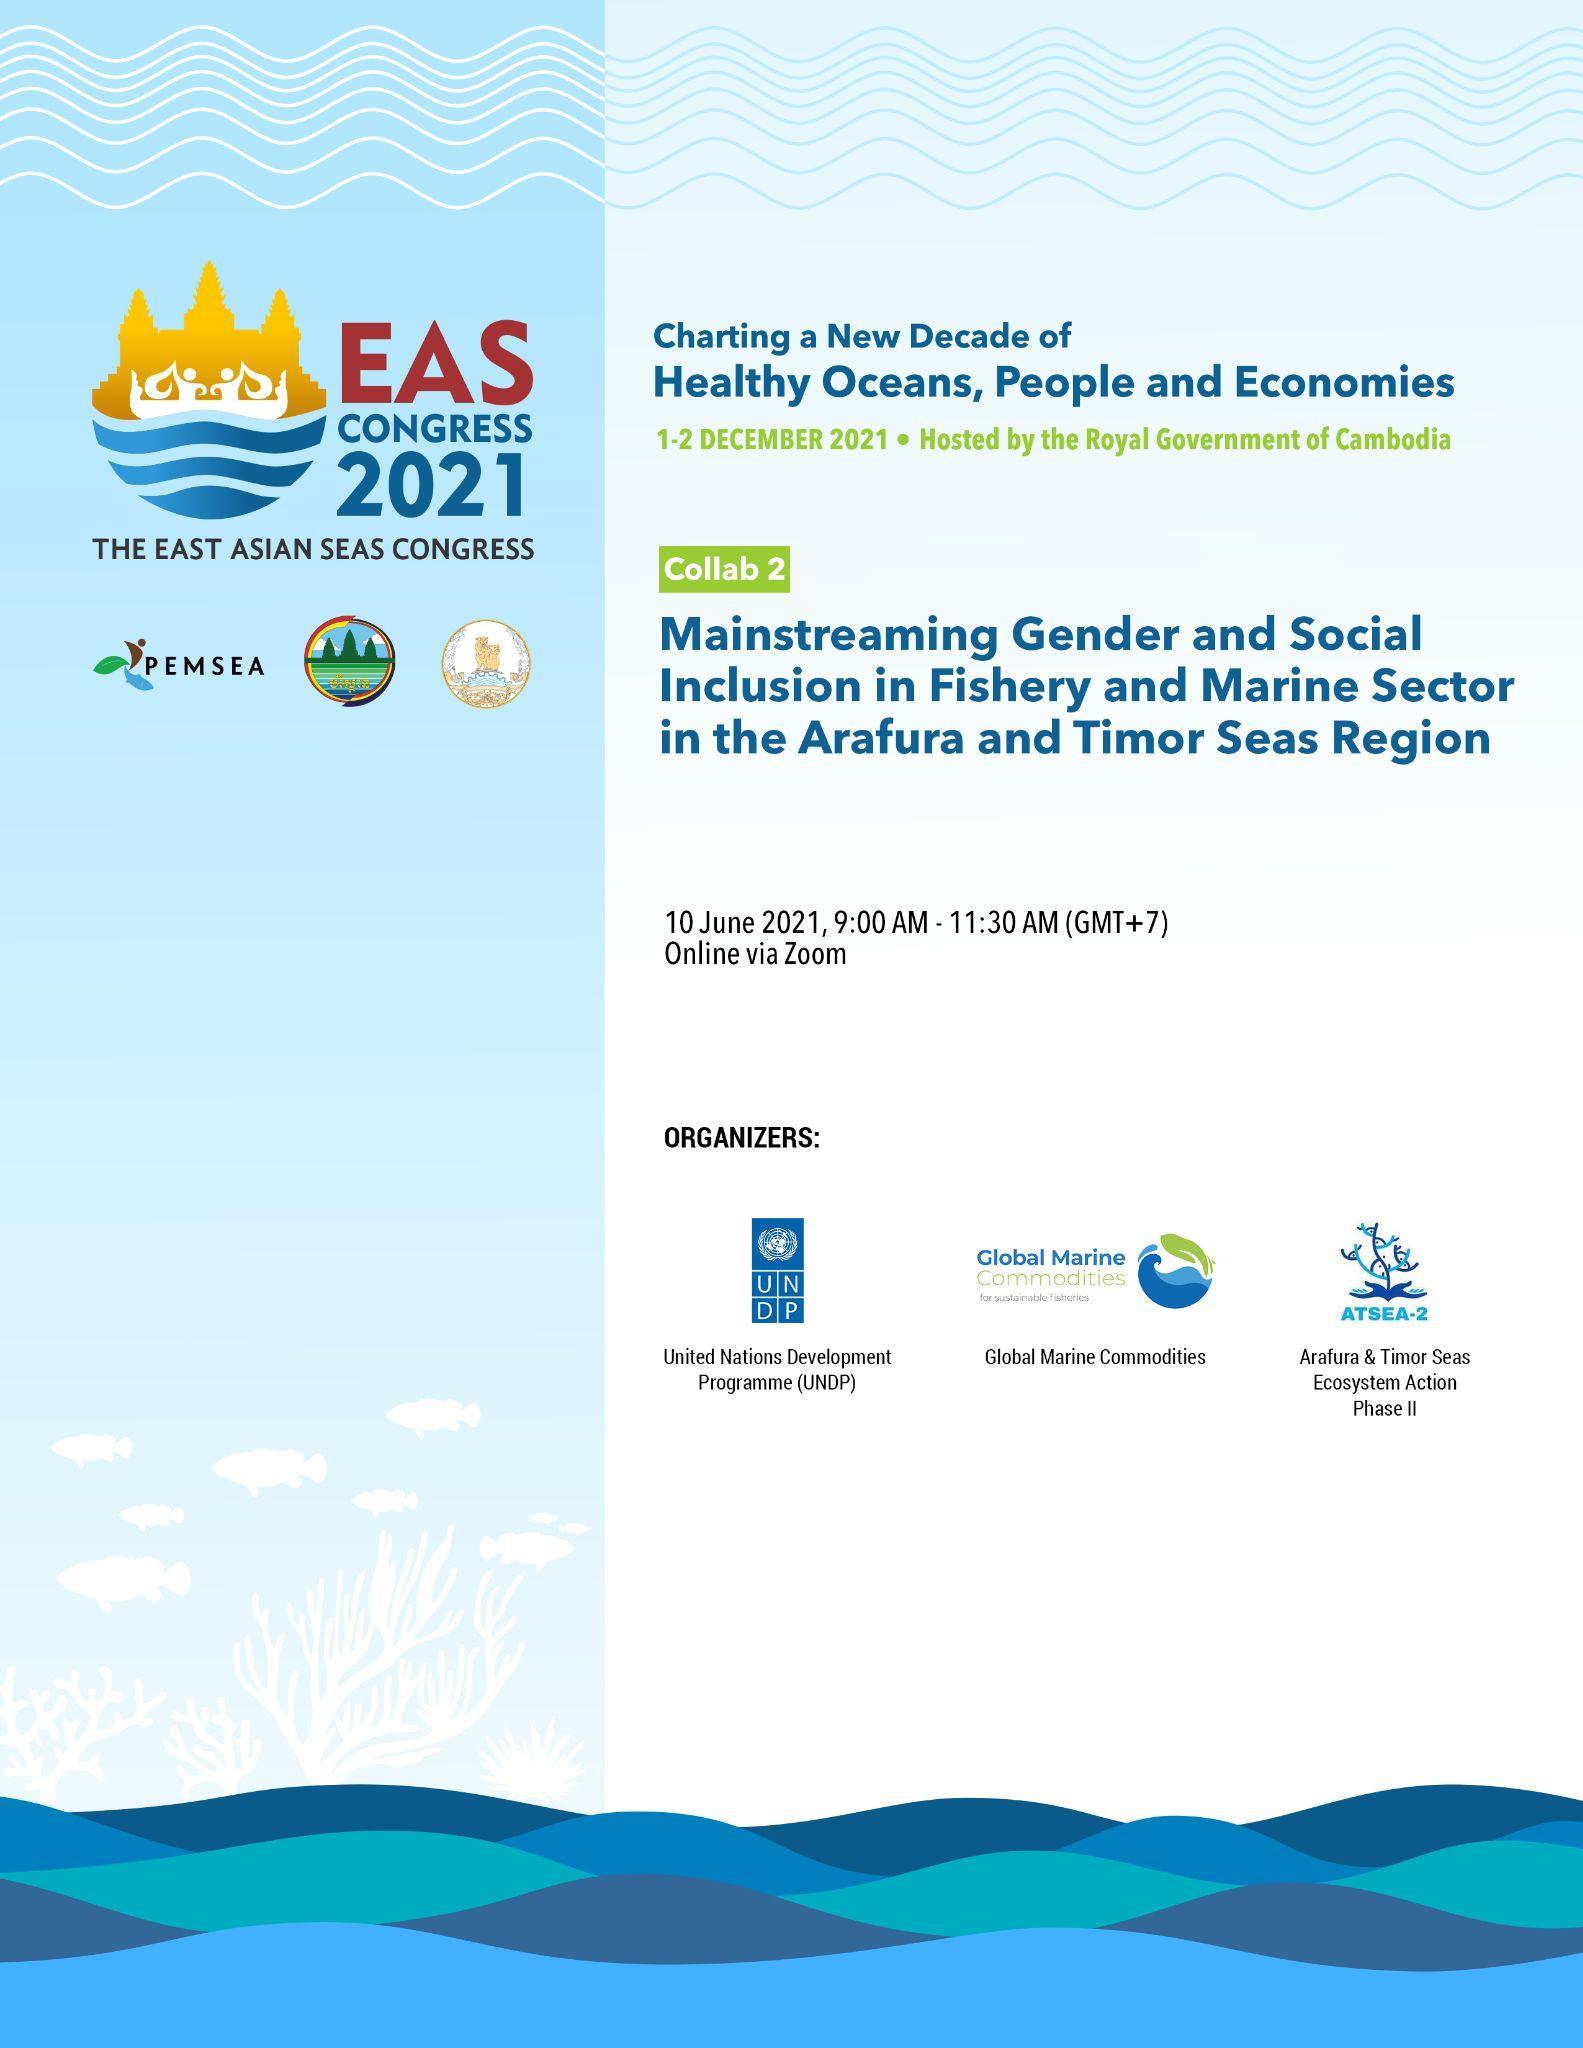 Collab 2 Mainstreaming and Social Inclusion in Fishery and Marine Sector in the Arafura and Timor Seas Region